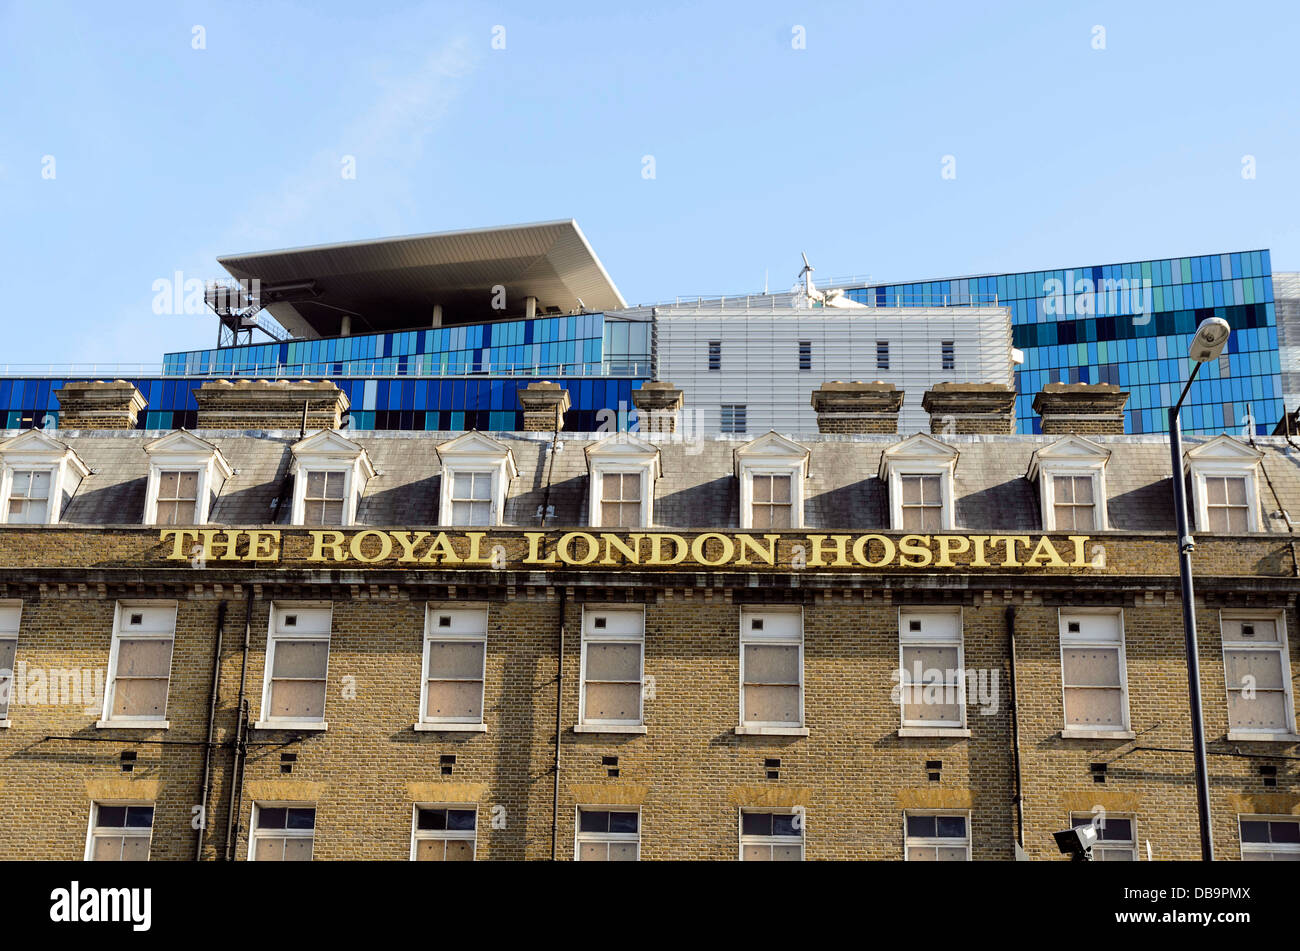 The royal London Hospital sign on the old facade of the building - London Stock Photo